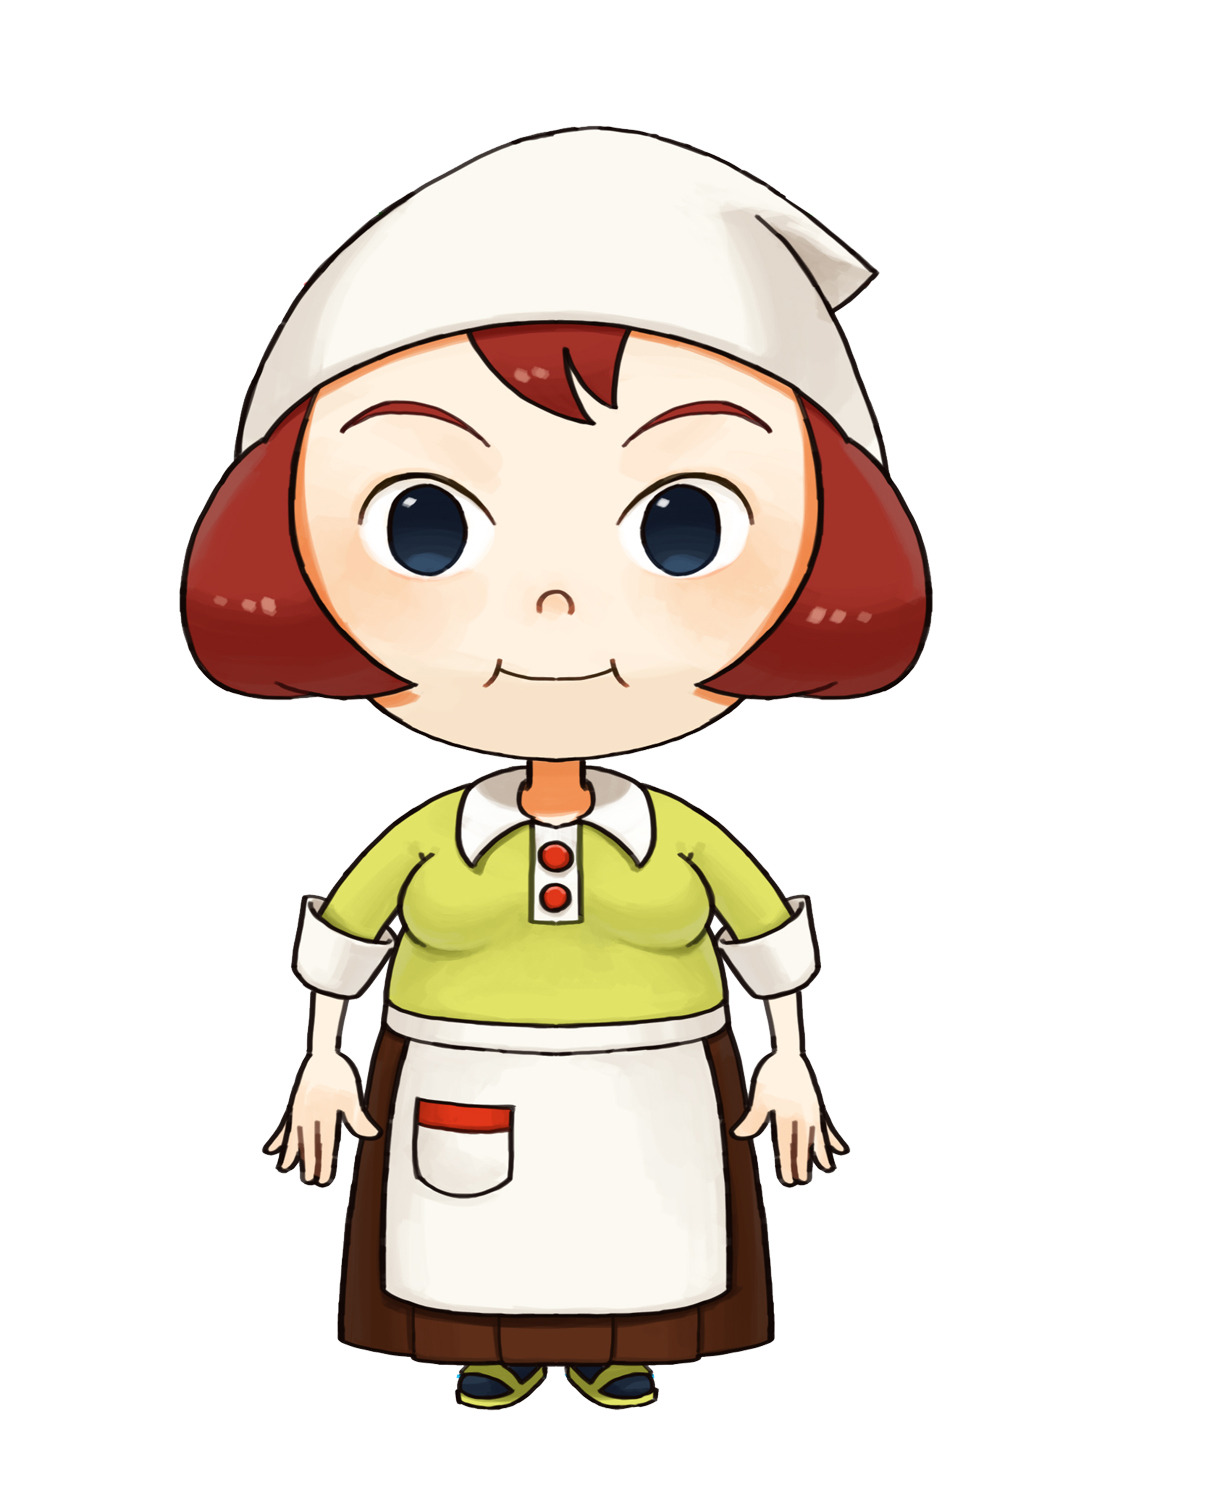 Hanna is this week’s featured villager in Meet the Residents of The Lost Valley! Hanna is the owner of the local café. With a mix of a feminine appearance and a tomboy personality she&#8217;s never outgrown, Hanna is a bit of a contradiction."Buy some of my food, will ya? I&#8217;m sure you&#8217;re gonna love it!"Though she can be a little careless with her words and actions, Hanna has a big heart, and plenty of love for all her customers – and her daughter, Emily!  As a middle-aged woman, she&#8217;s comfortably settled into the slower-paced lifestyle of the Lost Valley, and couldn&#8217;t think of living anywhere else. Stop by, and Hanna will be sure to feed you plenty of delicious food, cooked and served by fellow family members."My hubby and I have a restaurant in town! Emily is the hostess!"Hanna runs the local eatery, while her daughter Emily serves as the hostess of the restaurant. Hanna is very proud that her daughter Emily is carrying on the family tradition by working in the restaurant. Read more about Emily, our first bachelorette reveal, at http://ceecee-natsume.tumblr.com/post/93410632582/emily-is-the-first-bachelorette-were-revealing